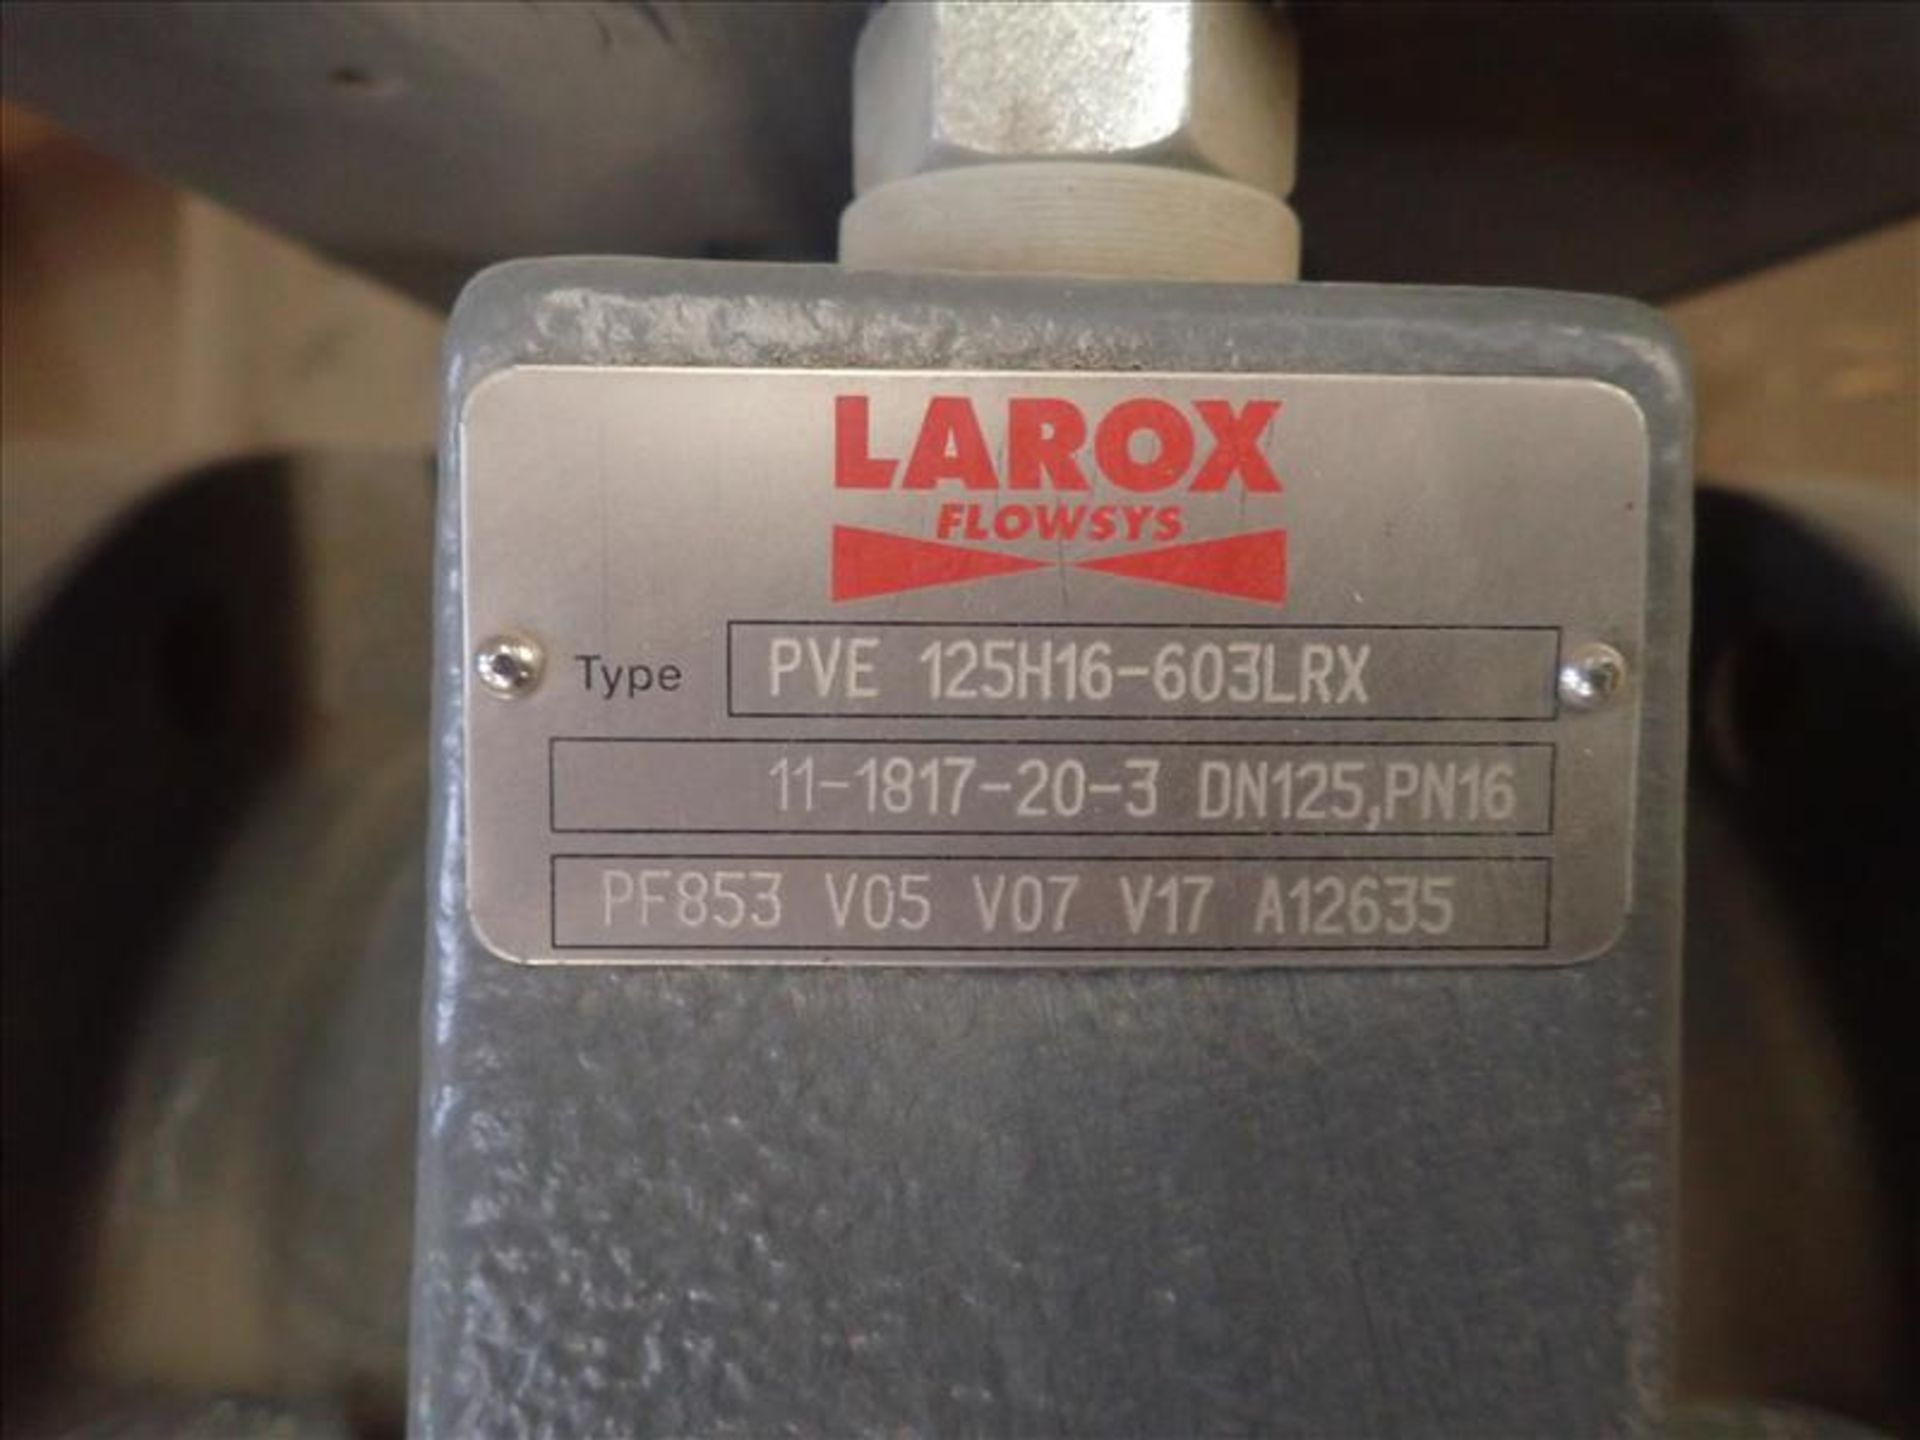 Larox Flowsys actuated pinch valve, mod. PVE 125H16-603LRX, 5 in. dia. (Tag 8974 Loc WH North) - Image 2 of 2